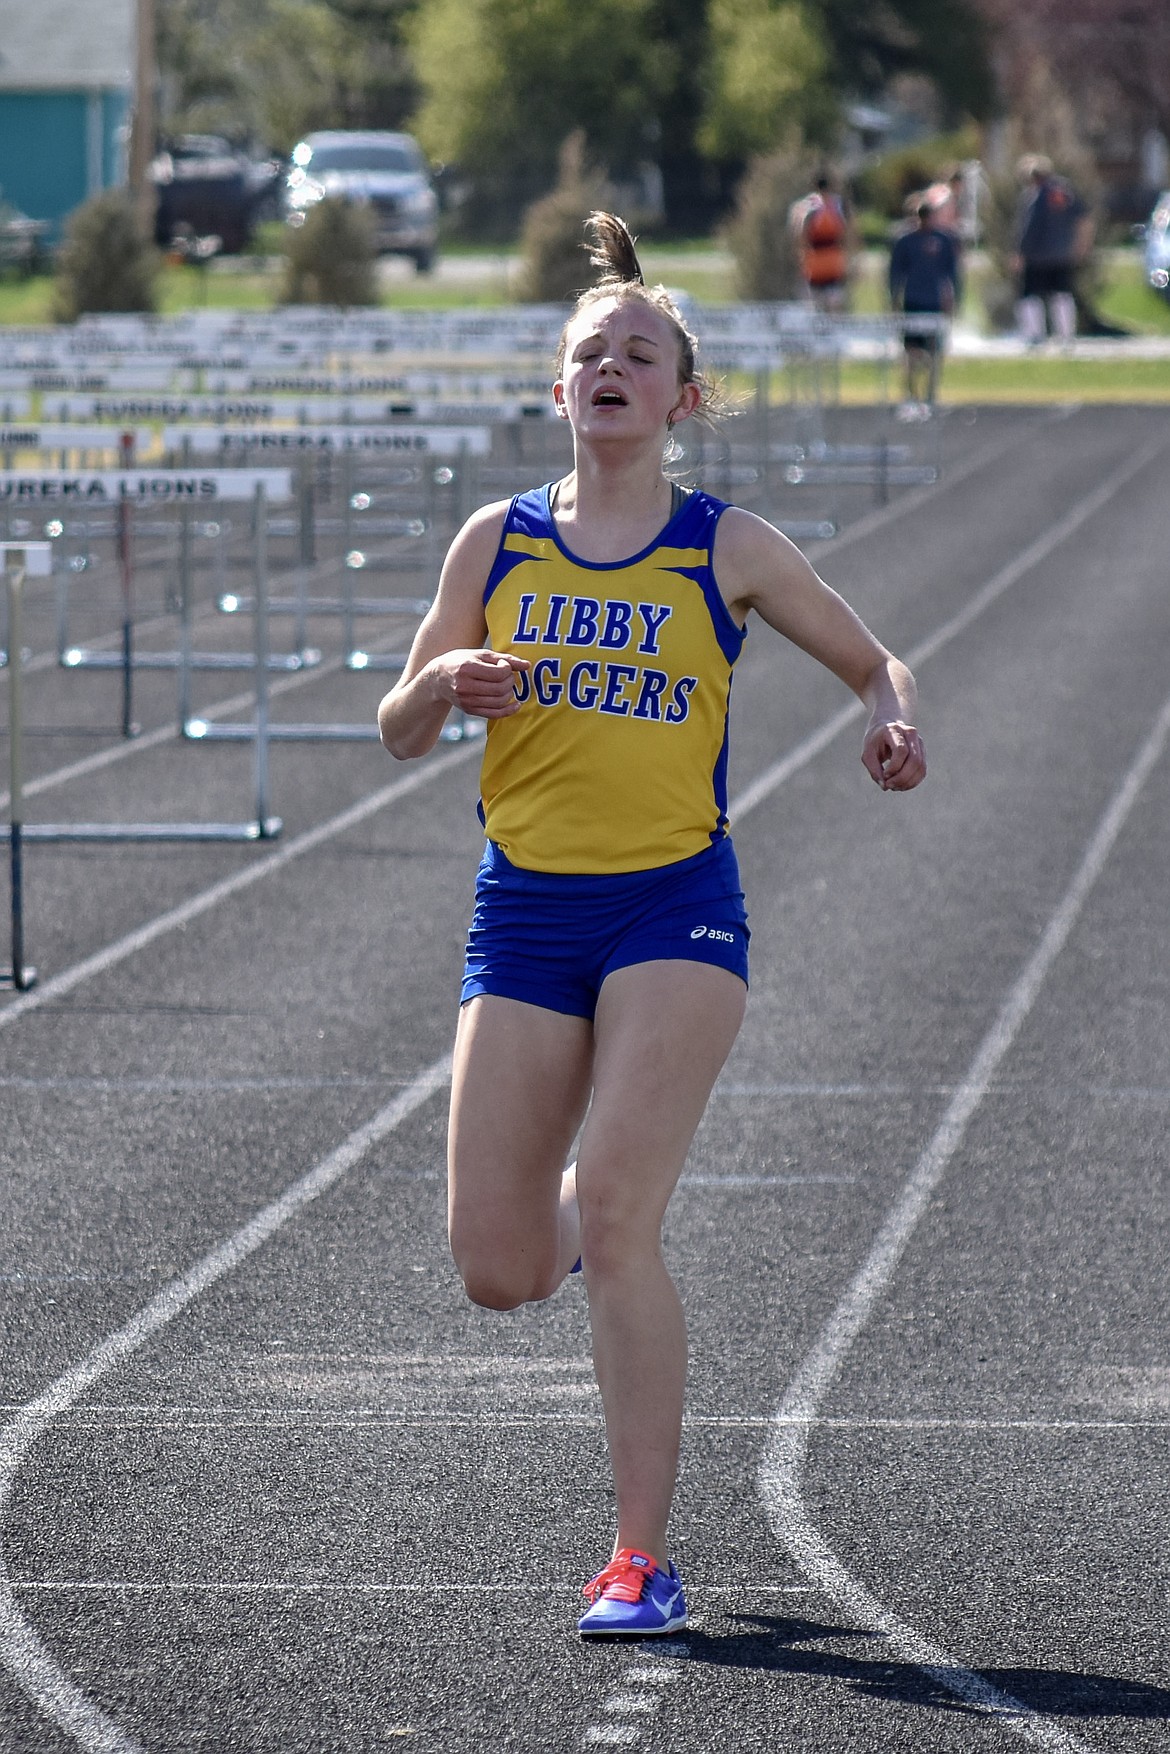 Finishing with a time of 6:10.76, Libby junior Lauren Thorstenson wins the 1,600m run at the Lincoln County Track Meet Tuesday. (Benjamin Kibbey/The Western News)